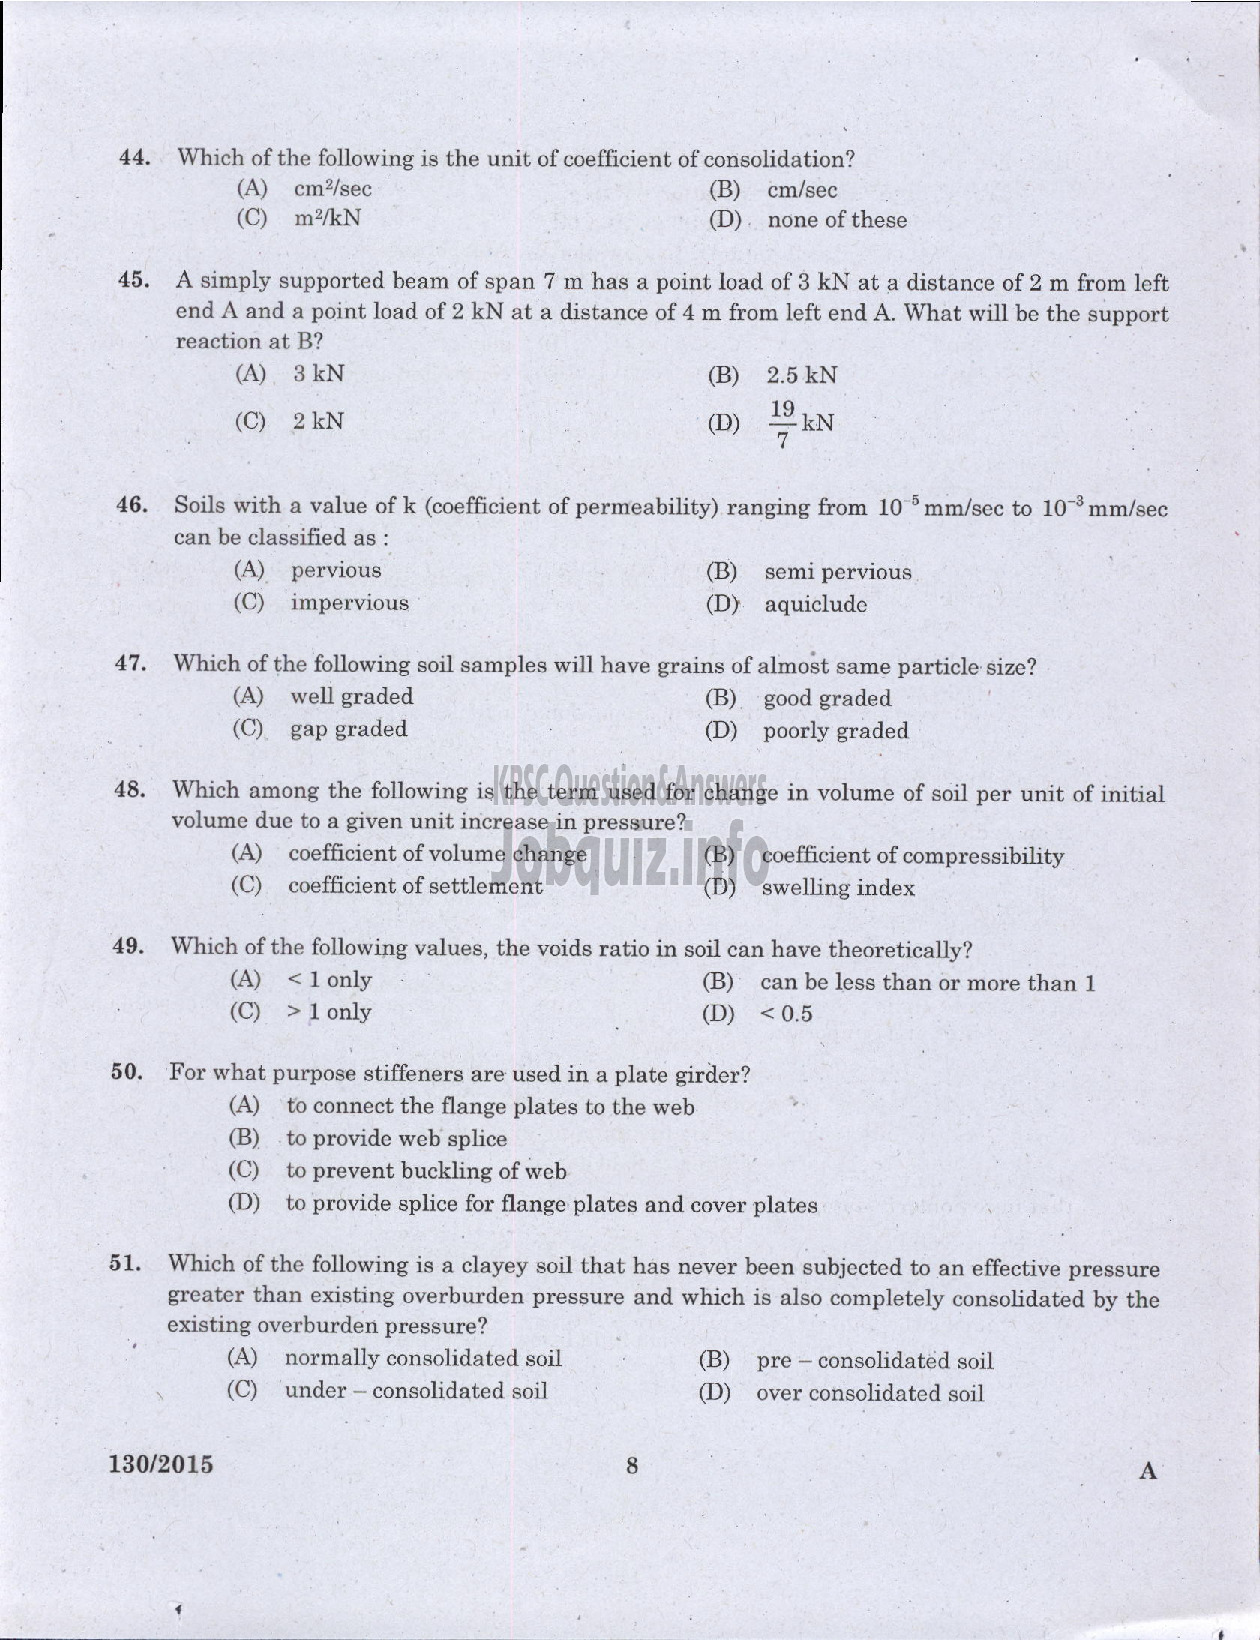 Kerala PSC Question Paper - ASSISTANT ENGINEER CIVIL LOCAL SELF GOVERNMENT/PWD/IRRIGATION-6